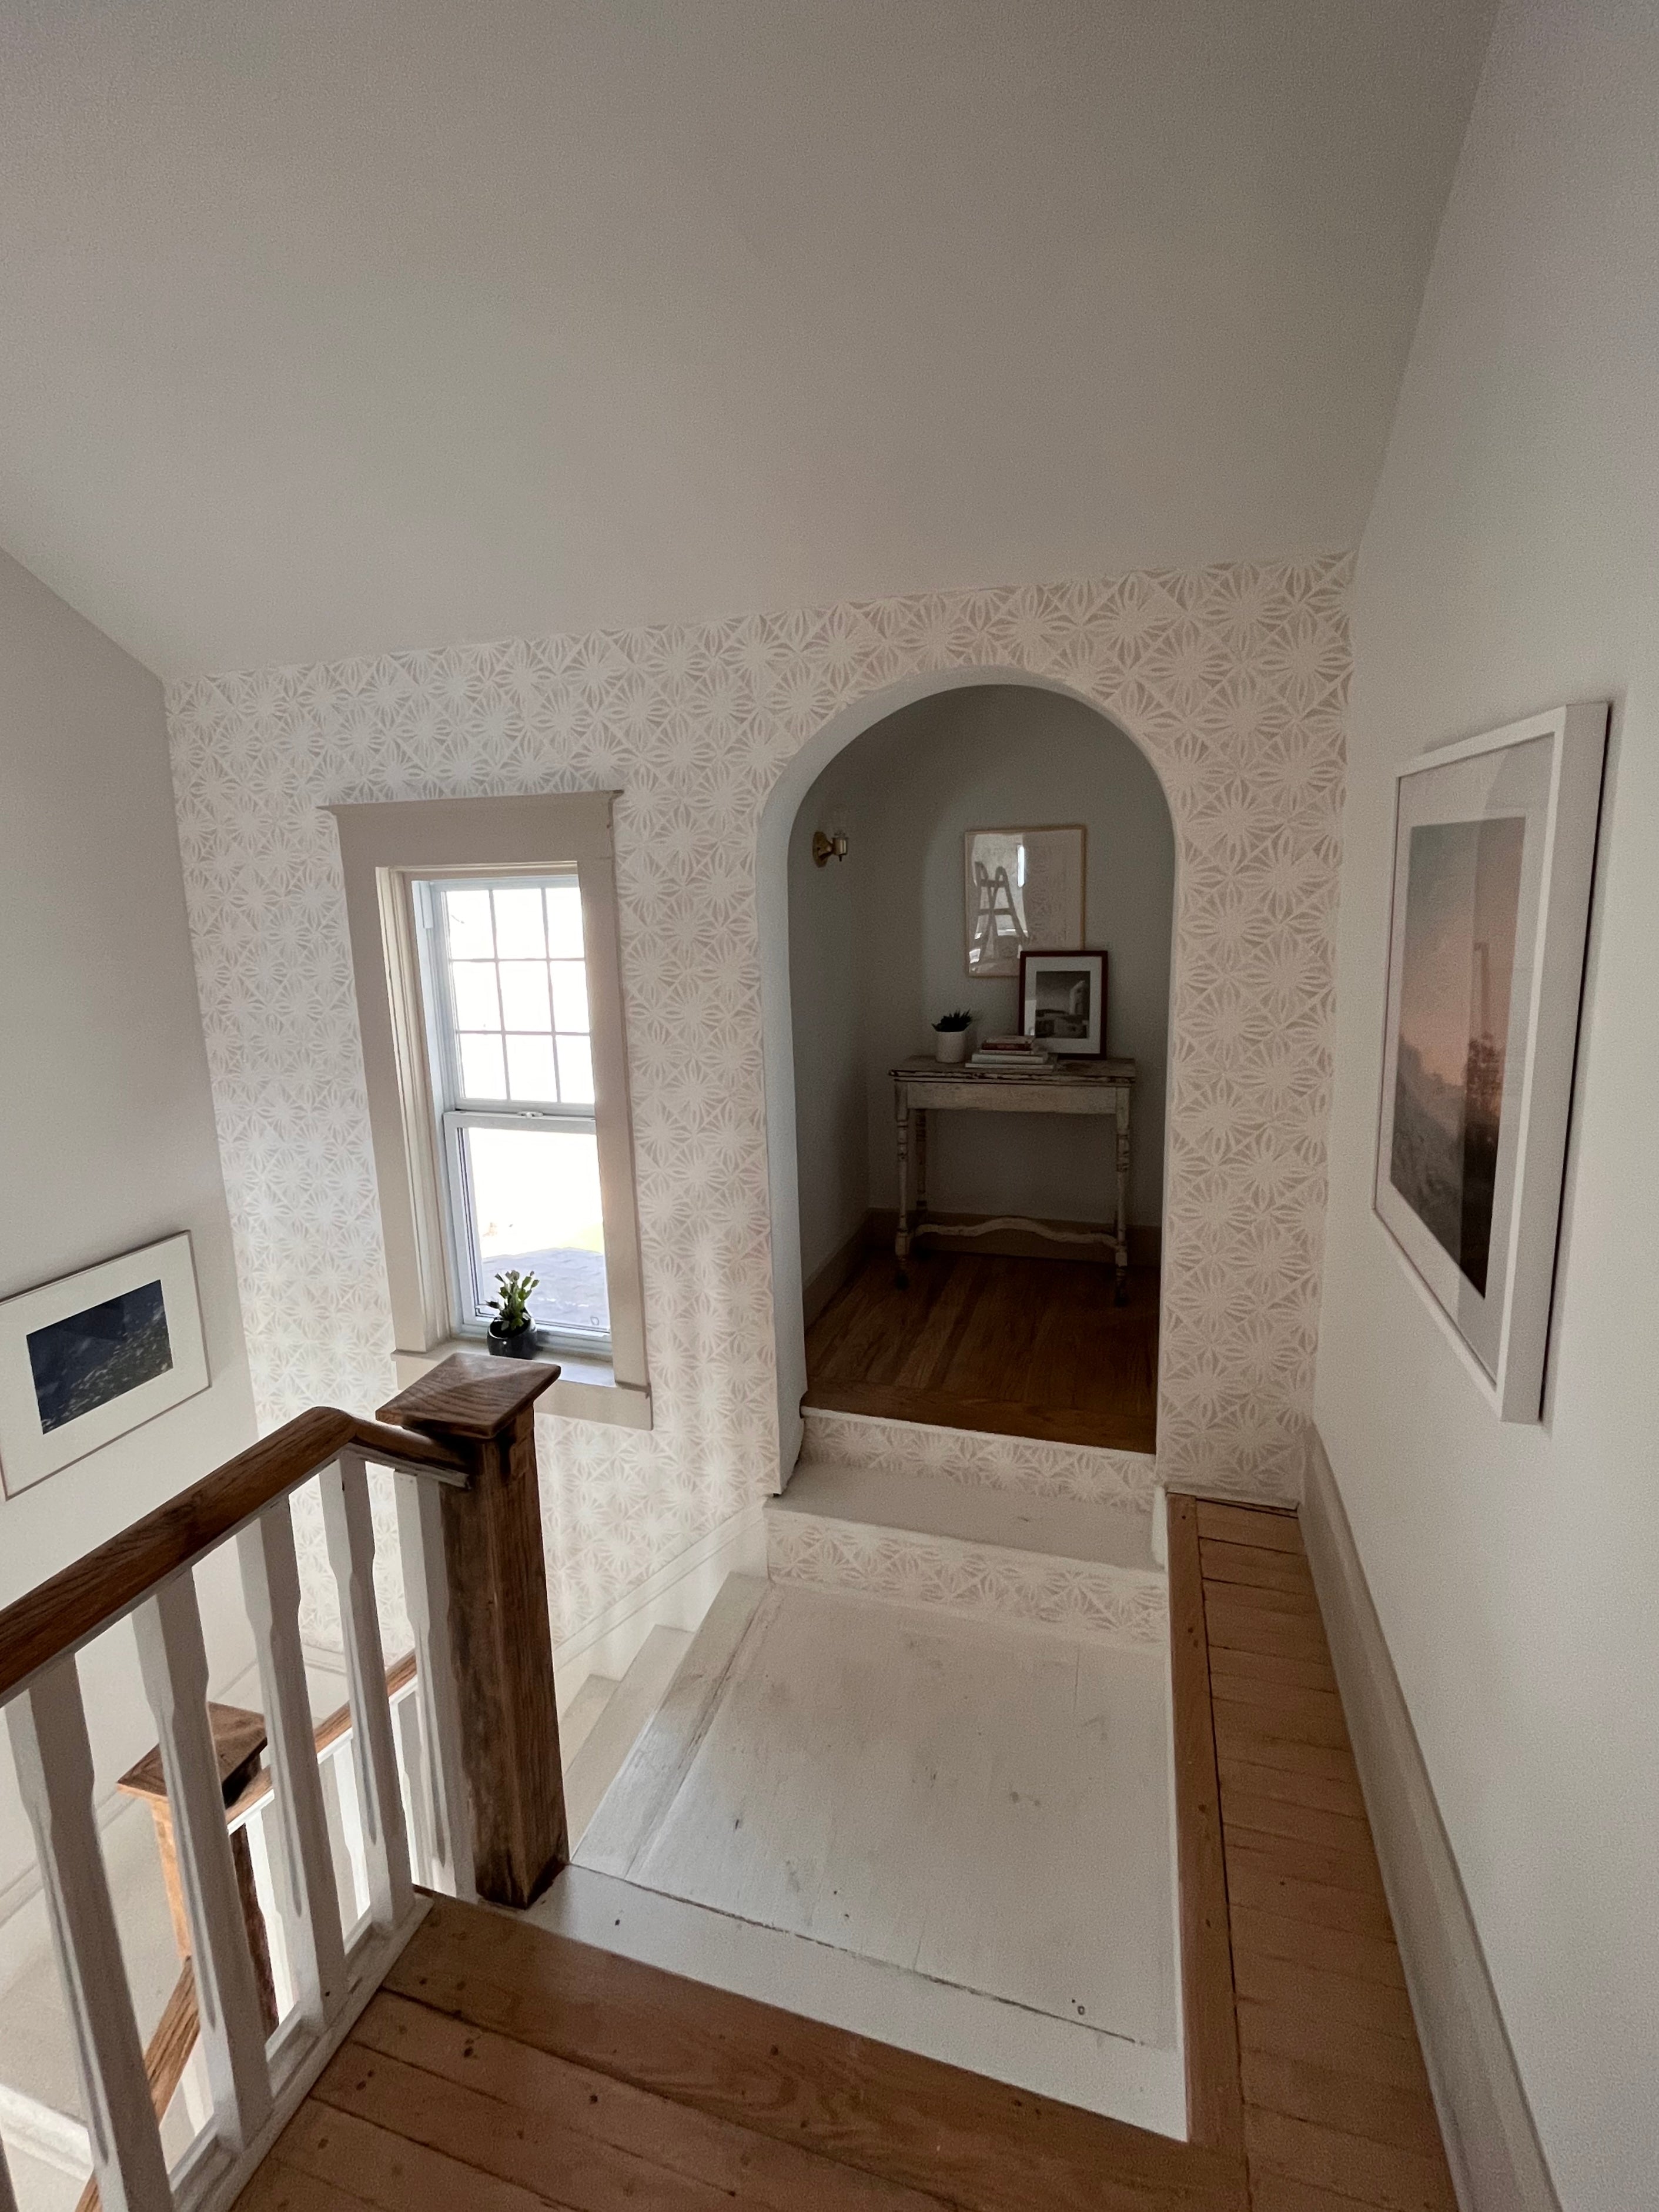 An inviting hallway featuring the Moroccan Tile Wallpaper II - Linen with a geometric pattern, creating a sophisticated visual texture. The scene includes a wooden staircase and a peek into a room with a classic white console table.